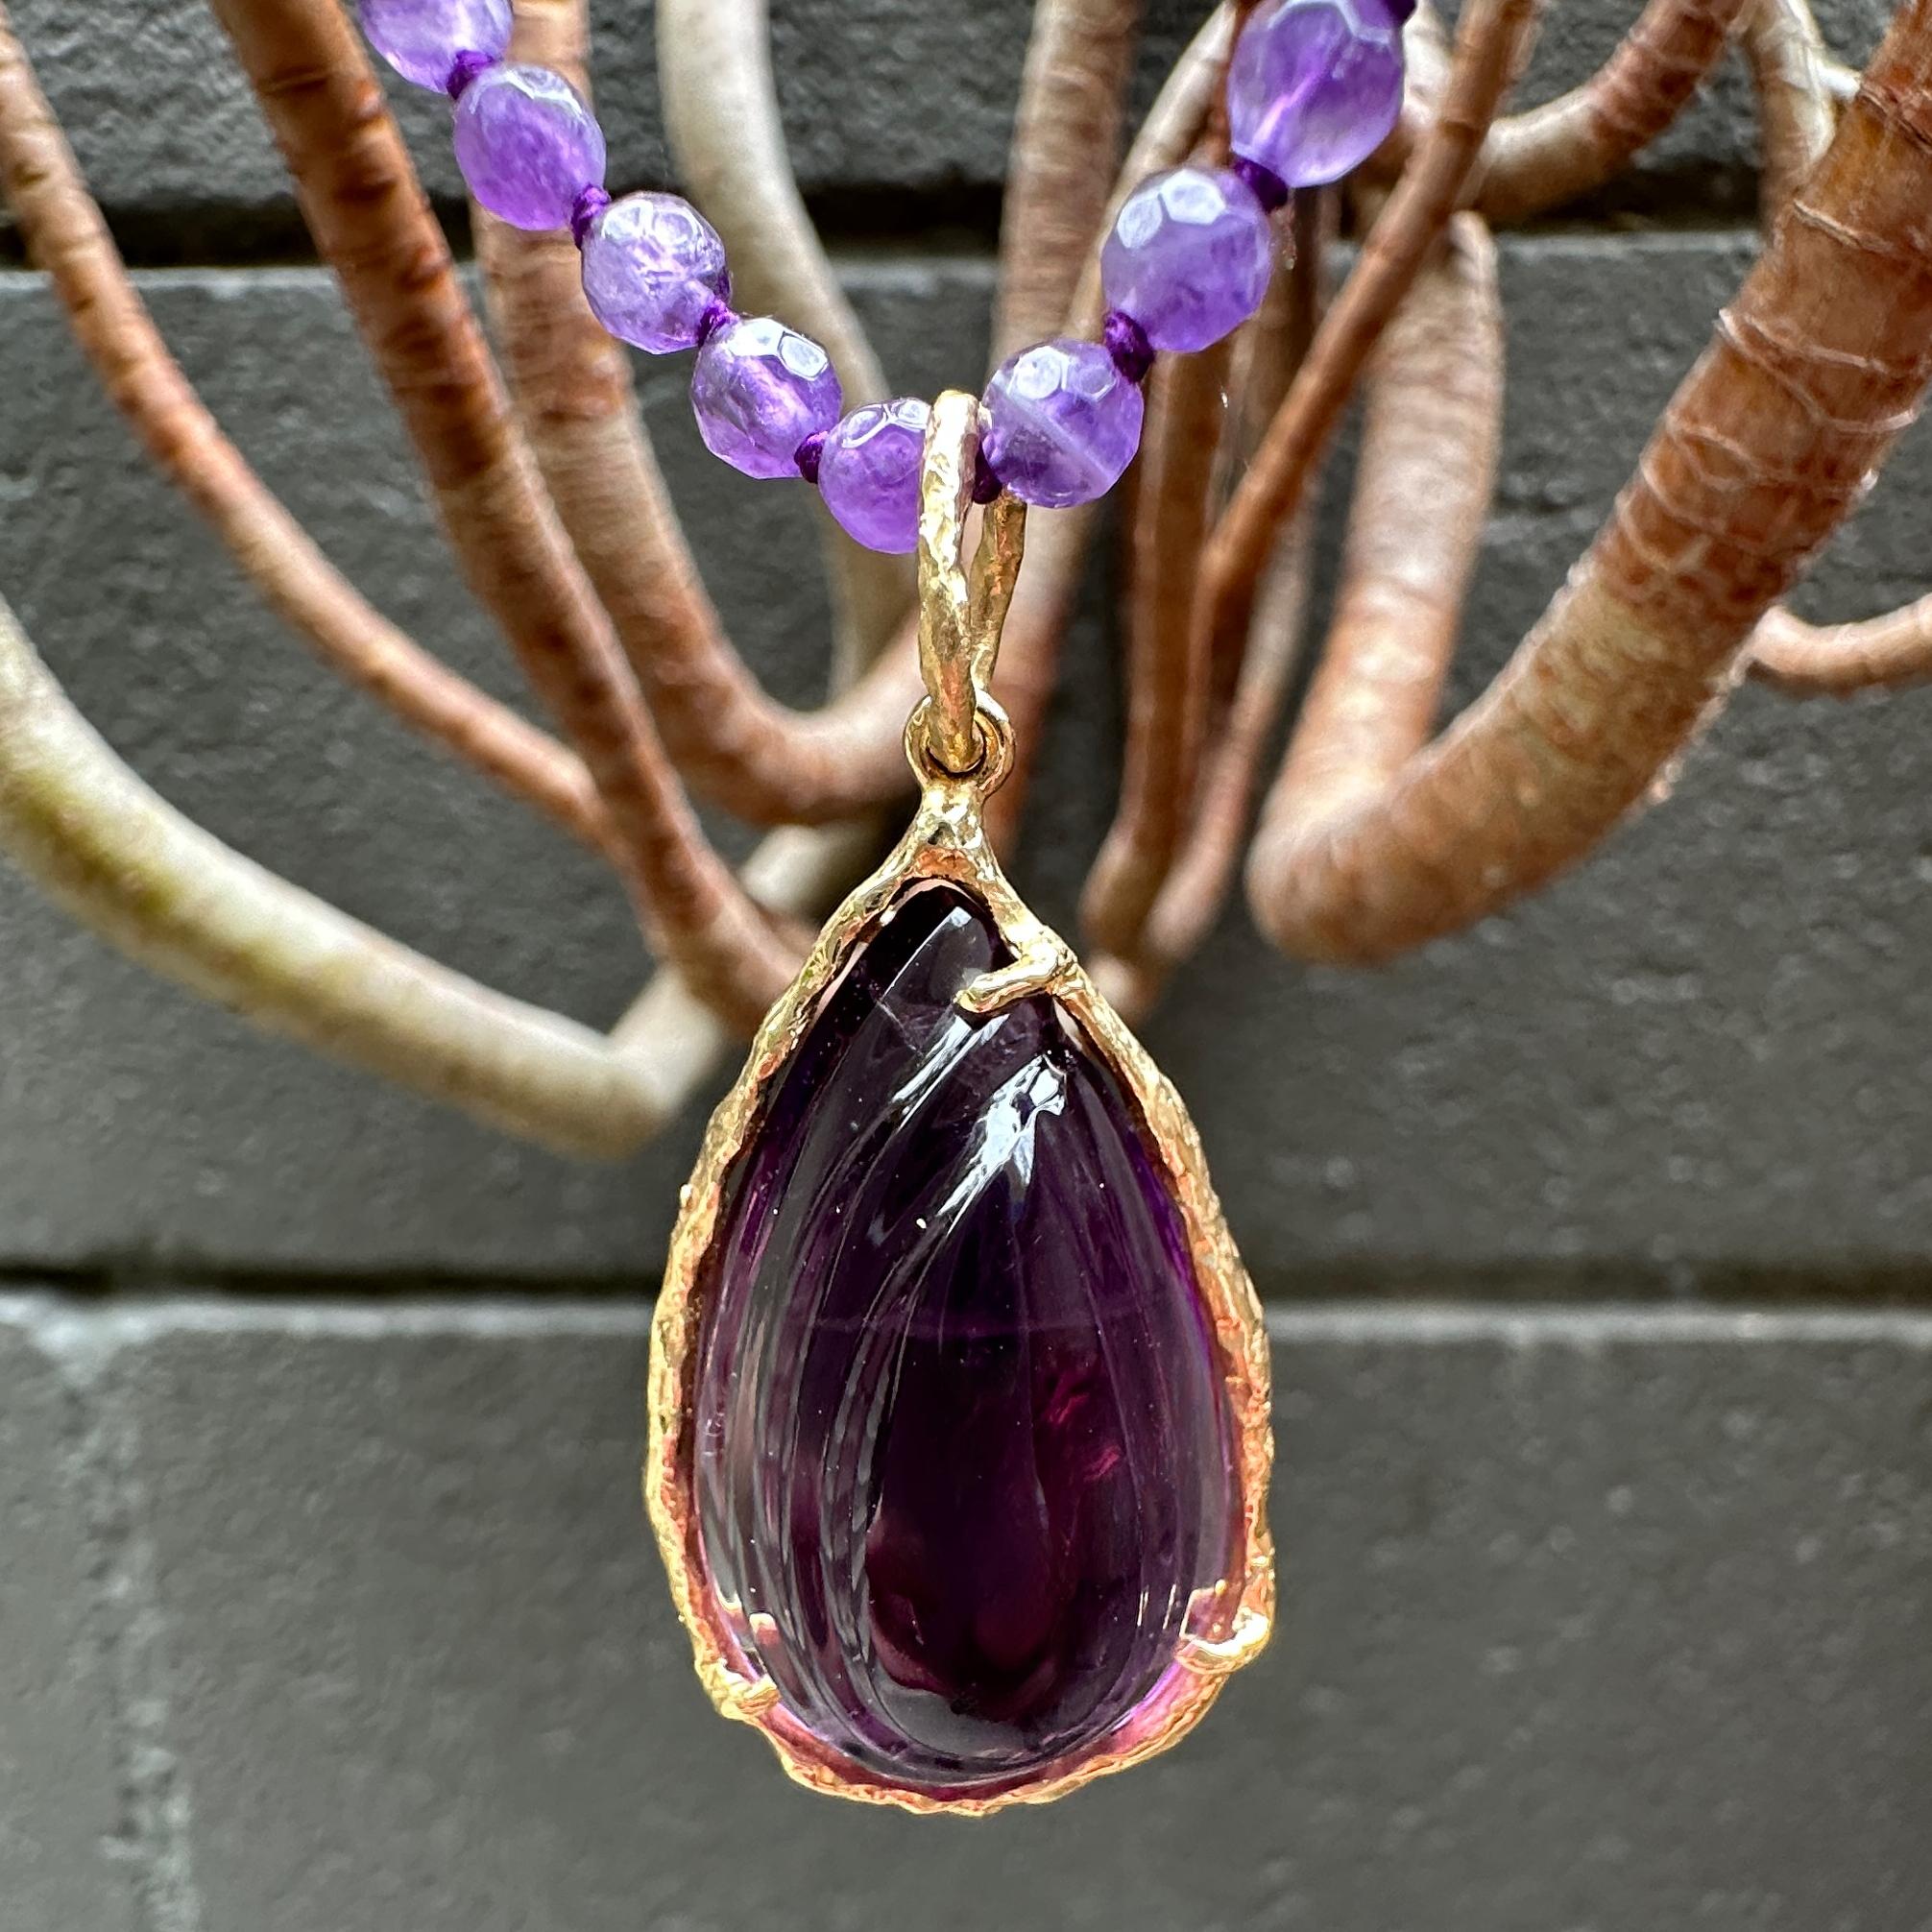 39 Carat Carved Amethyst Pendant in 18K Gold on Convertible Amethyst Bead Chain For Sale 1